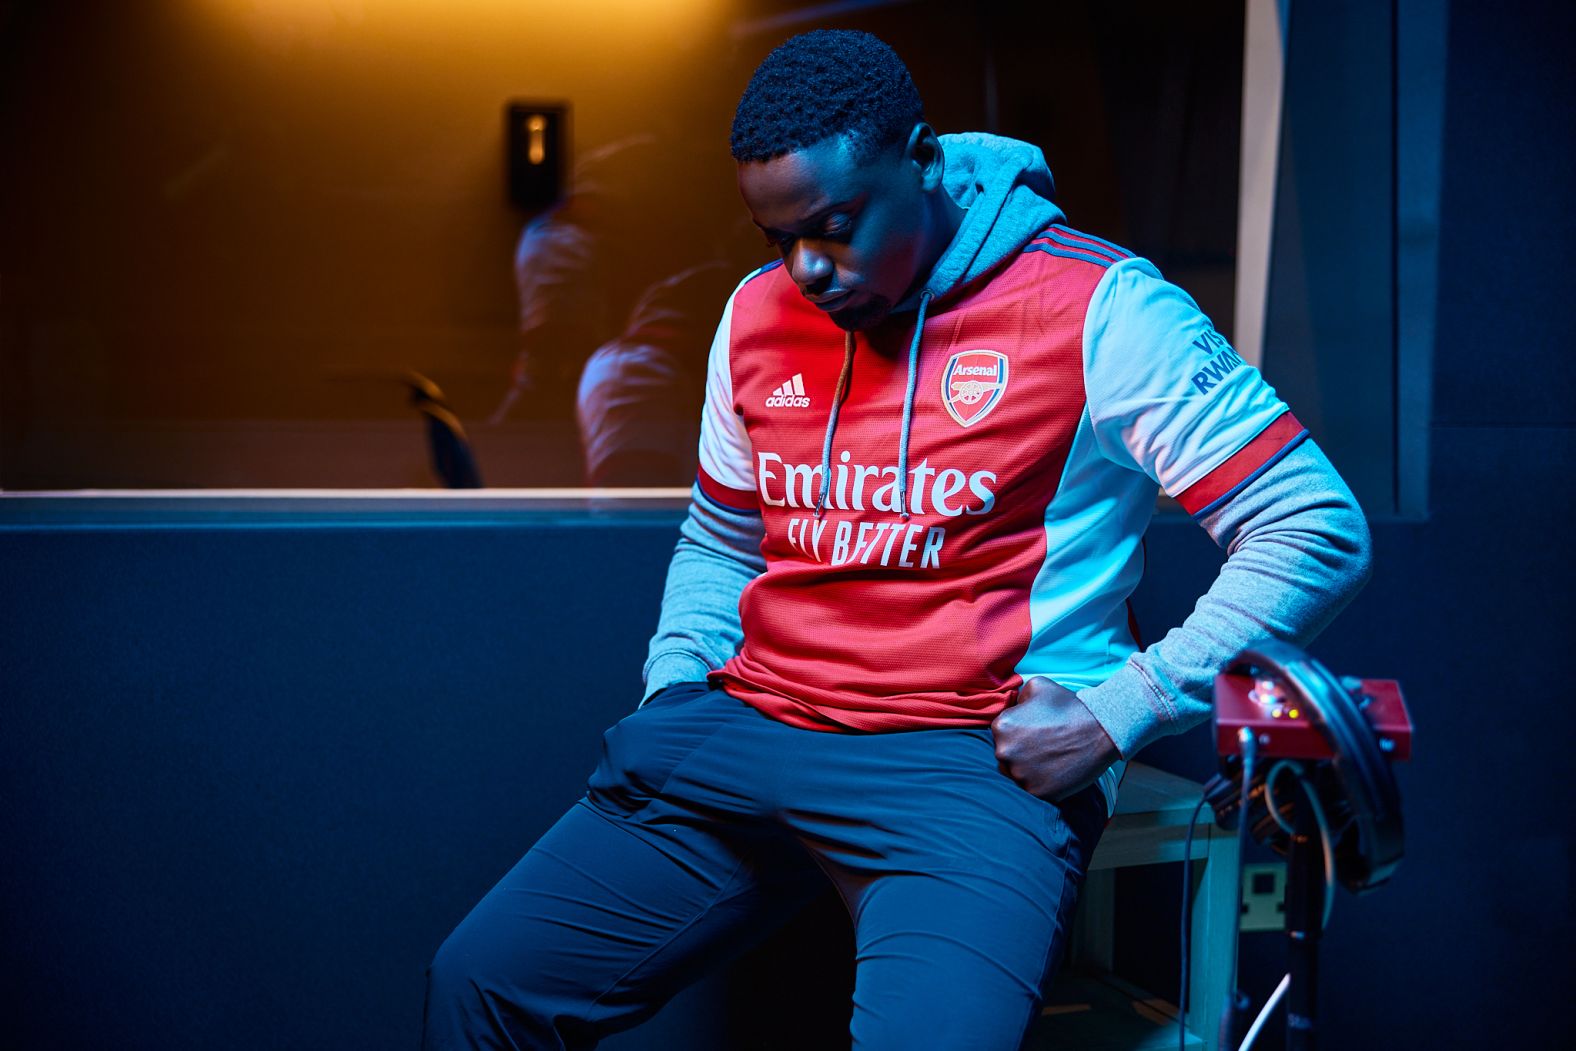 <strong>"All or Nothing: Arsenal"</strong>: Academy Award and BAFTA Award-winning actor and Arsenal fan, Daniel Kaluuya serves as the narrator who helps bring the club's rich history to life and takes viewers on the journey of the teams 2021/22 season. <strong>(Prime) </strong>